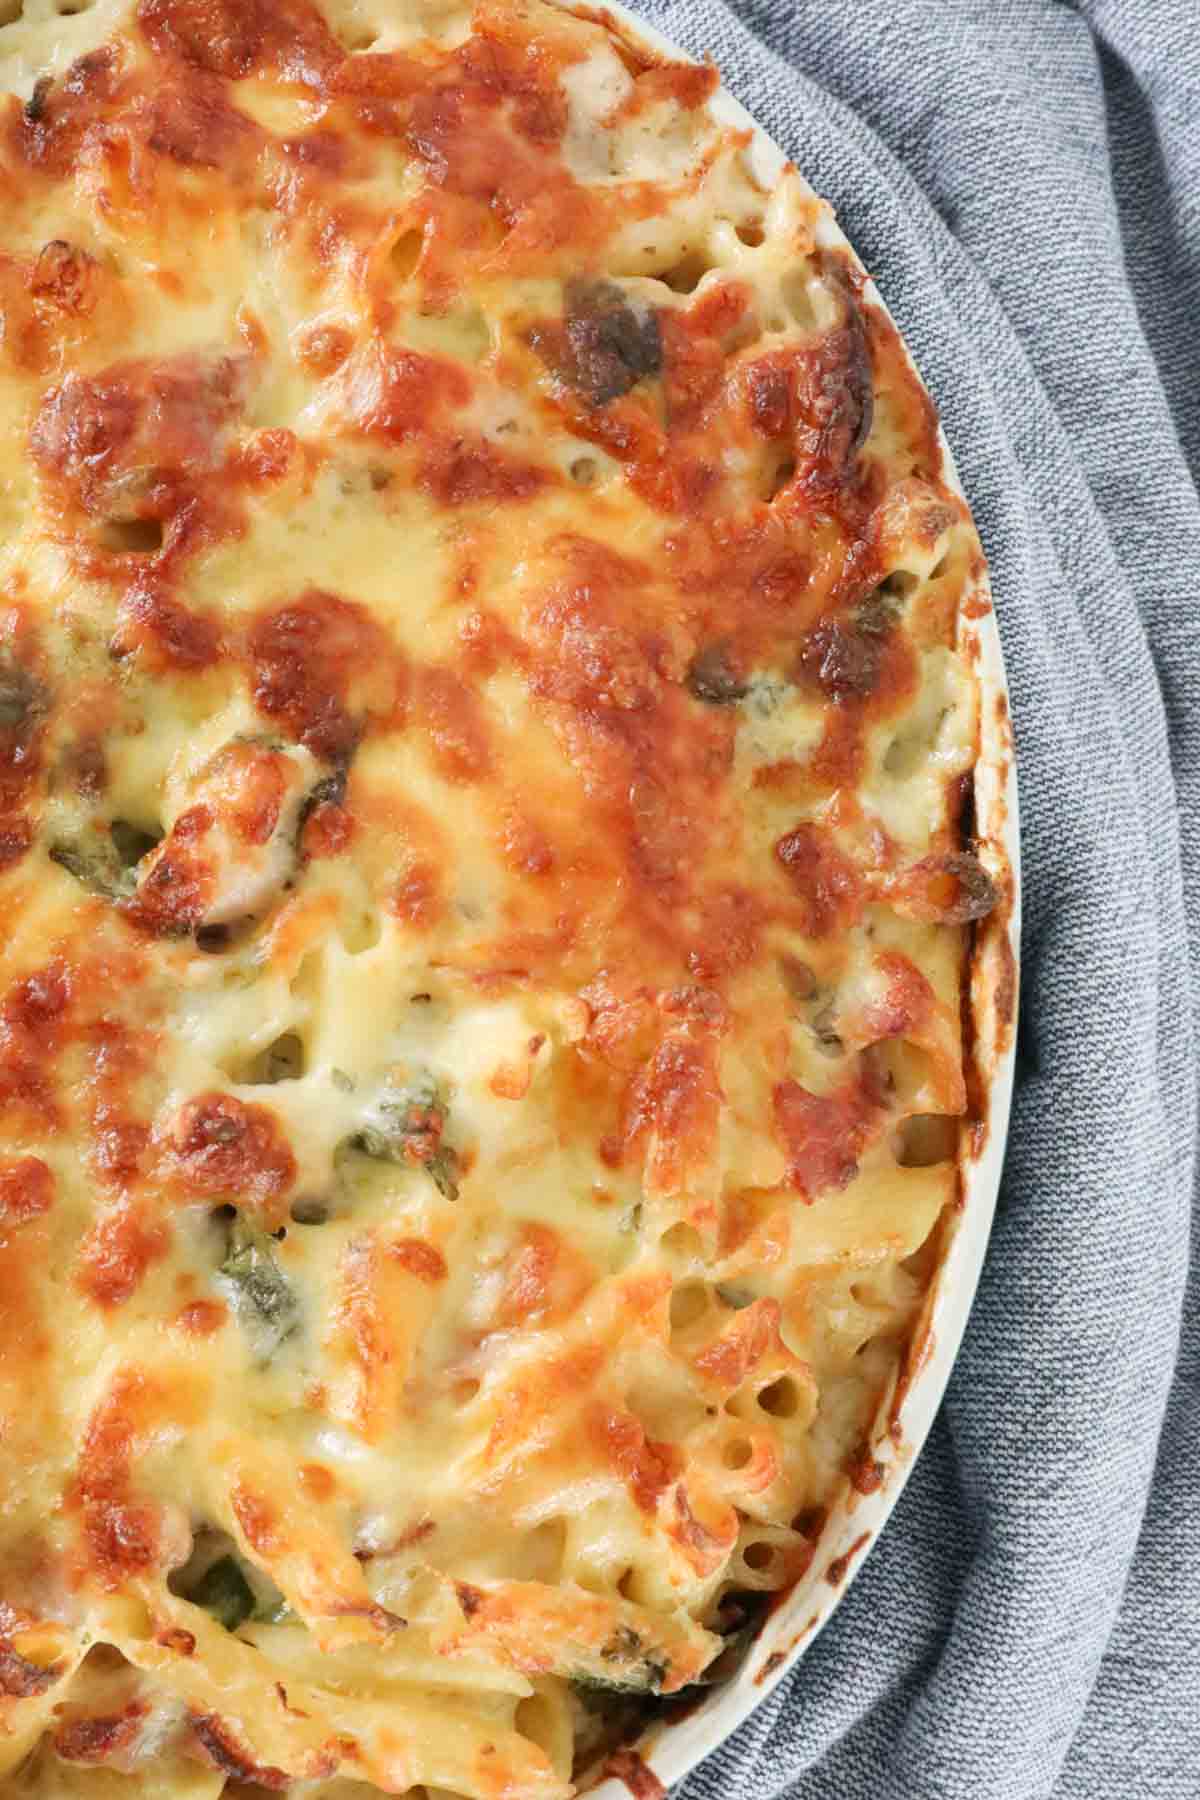 Crispy golden cheese melted over the top of a chicken pasta bake.